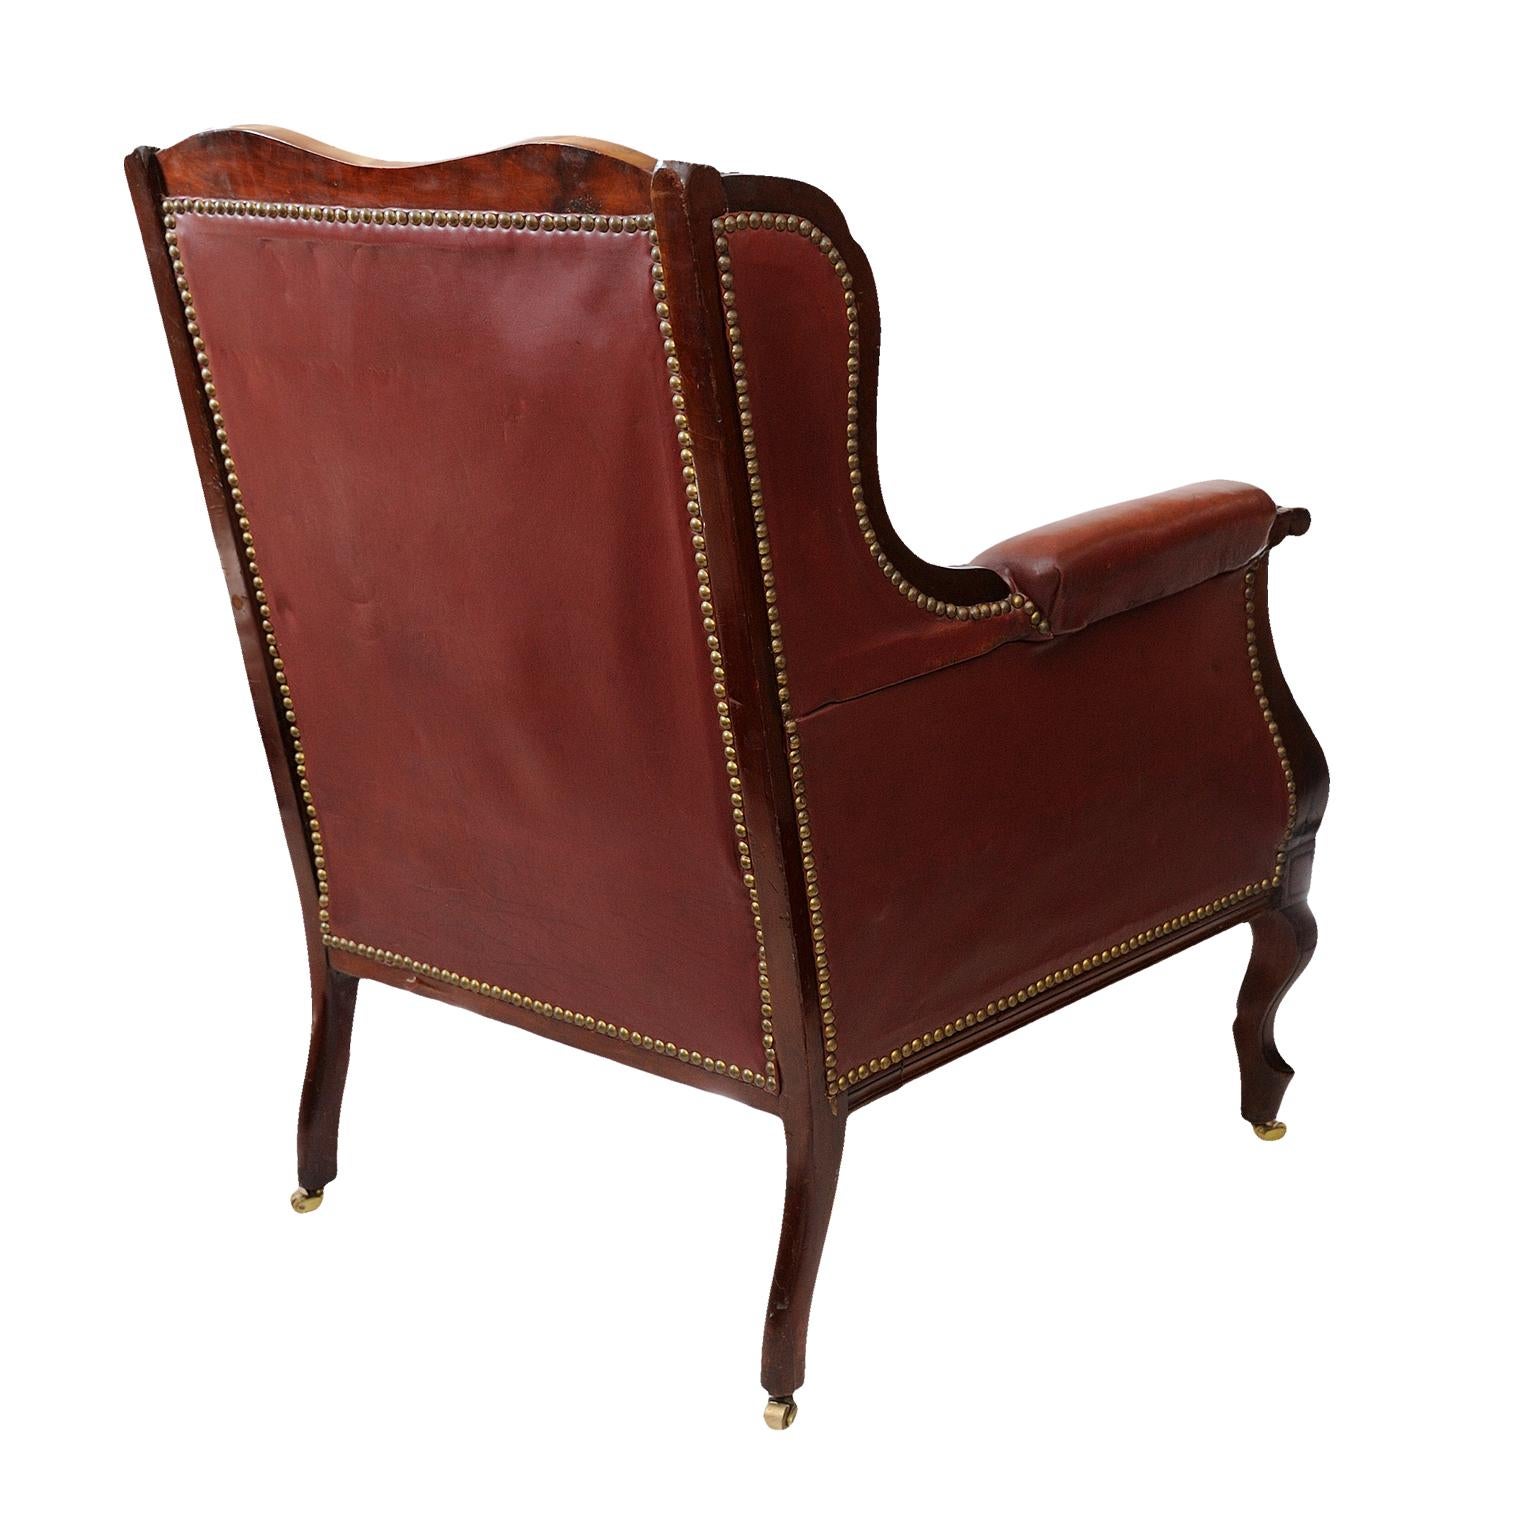 Polished French Louis XV Style Leather Bergere Chair, circa 1860 For Sale